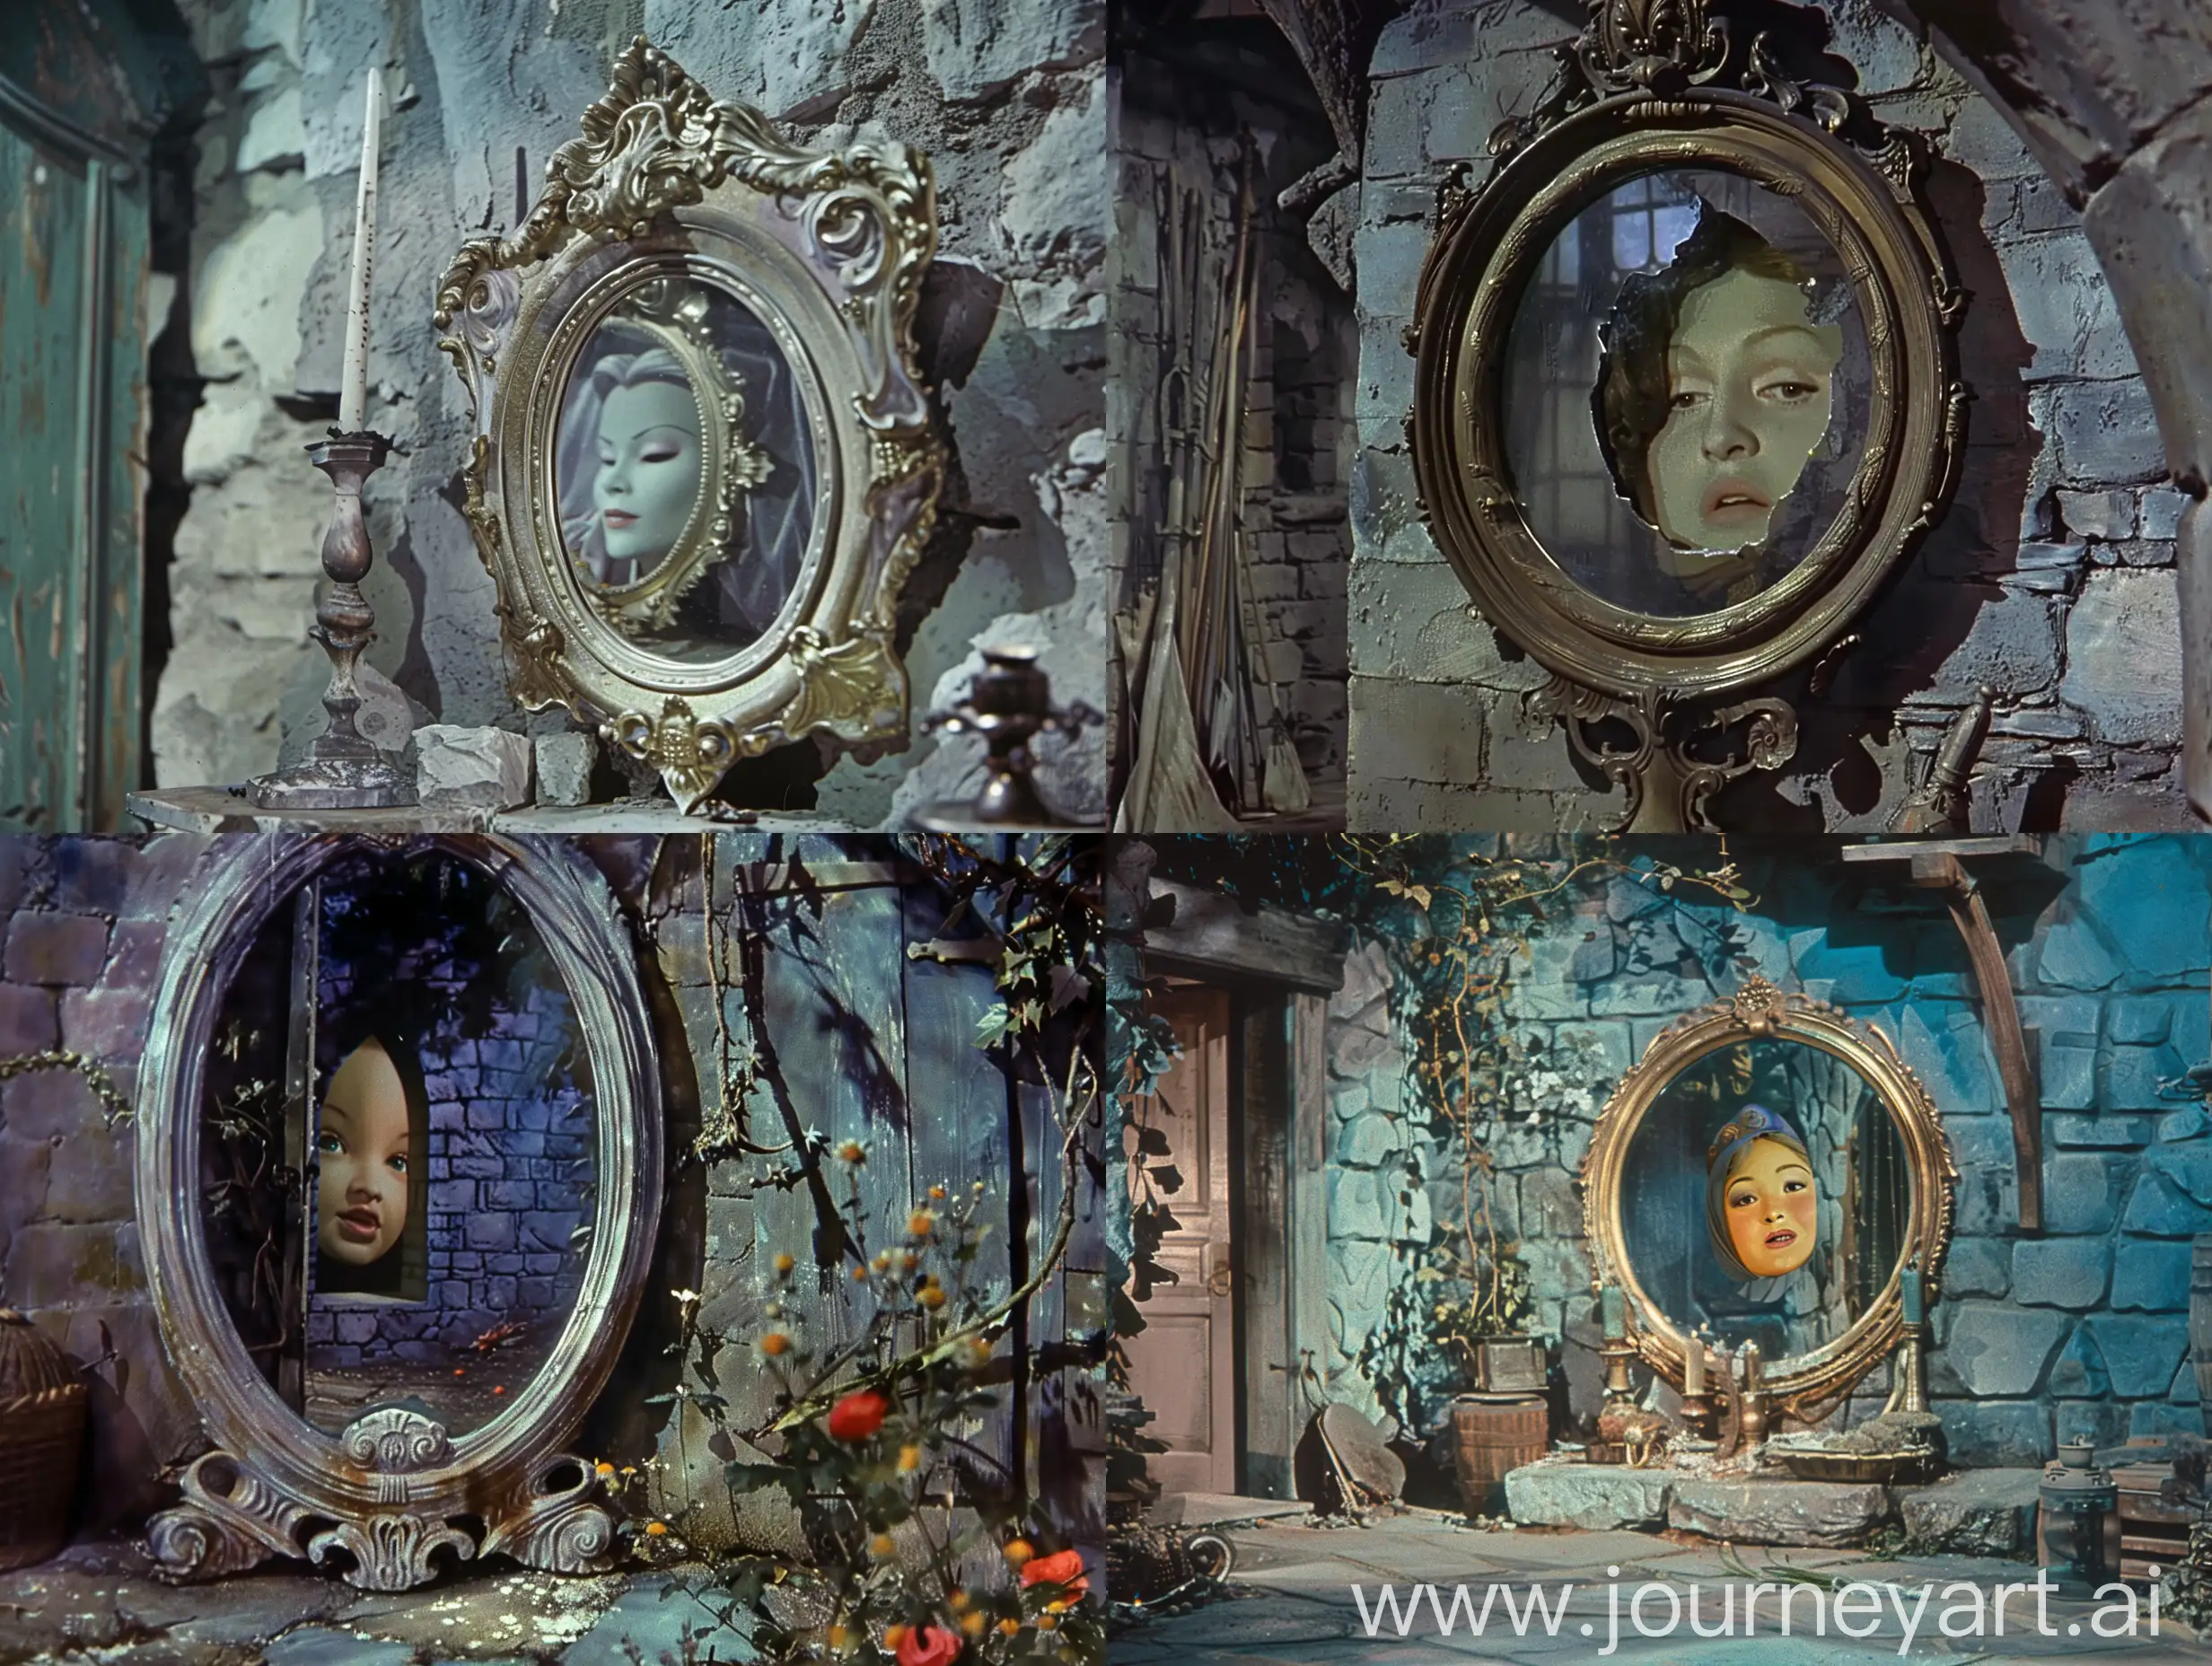 The magic mirror of the story of Snow White. There is a face inside the mirror and it is talking.1950's Superpanavision 70 , vintage color 